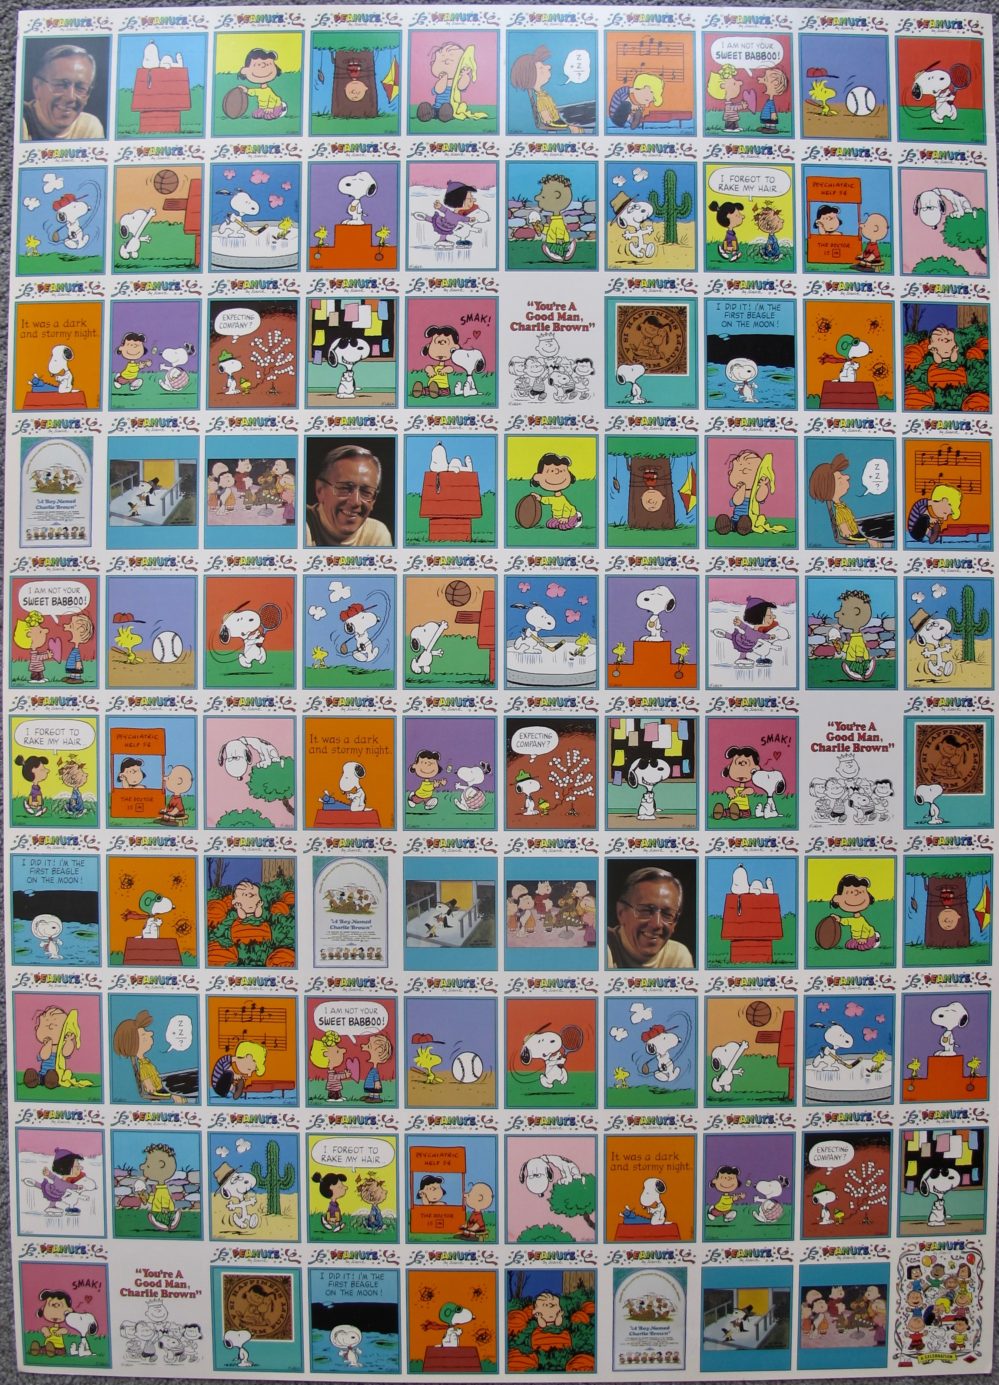 CHARLES SCHULTZ PEANUTS Uncut Trading Card Press Sheet Snoopy Charlie Brown Lucy